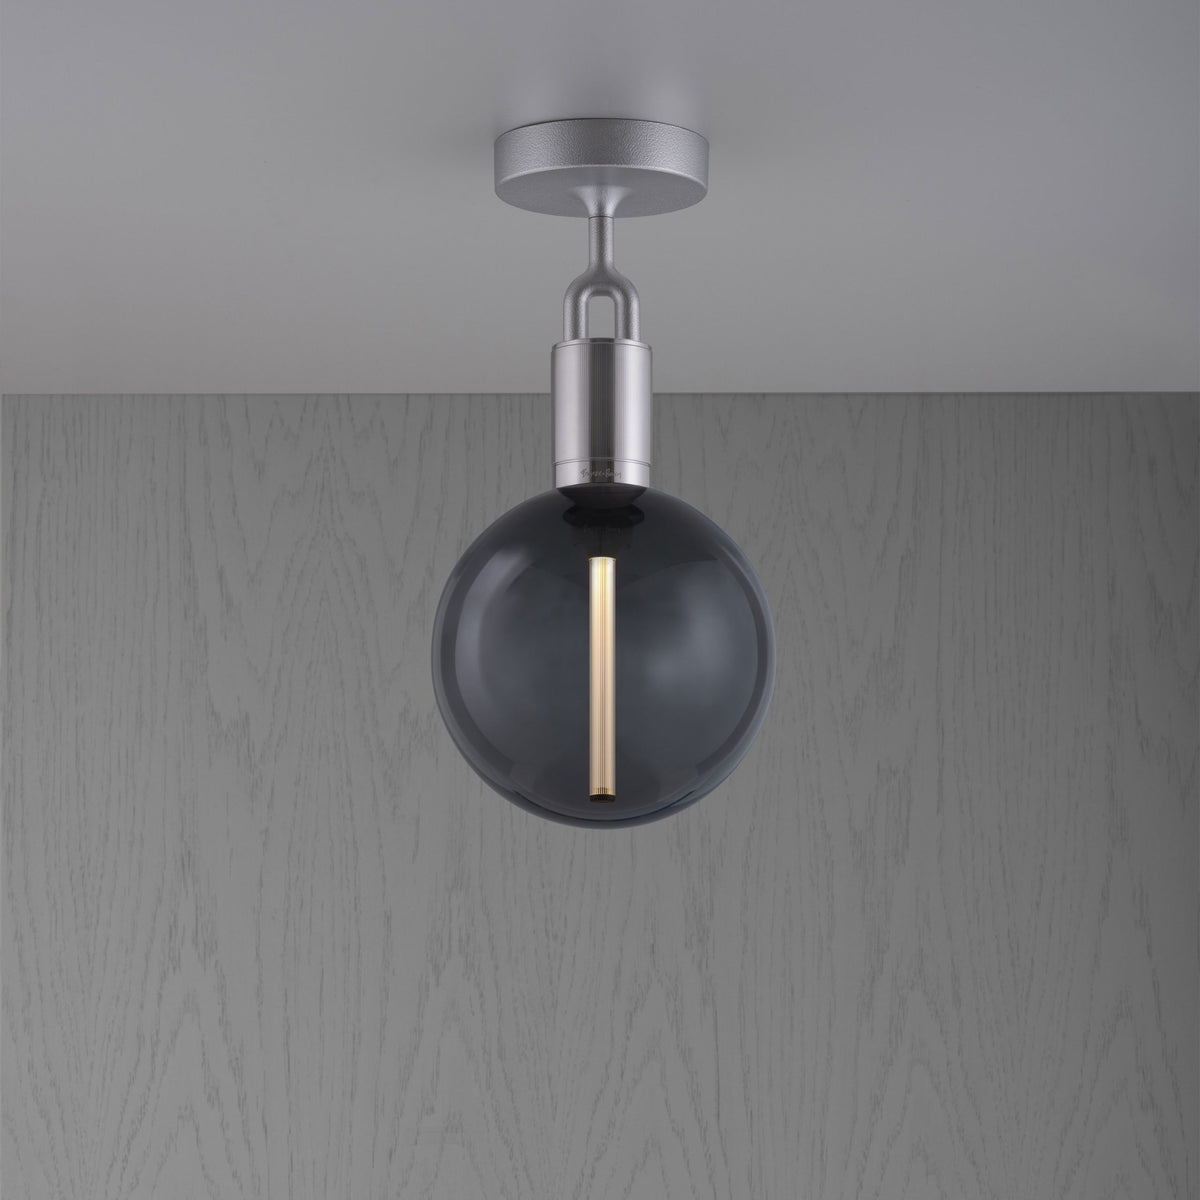 Buster + Punch - NFC-853234 - Forked Ceiling - Globe  - Forked - Steel